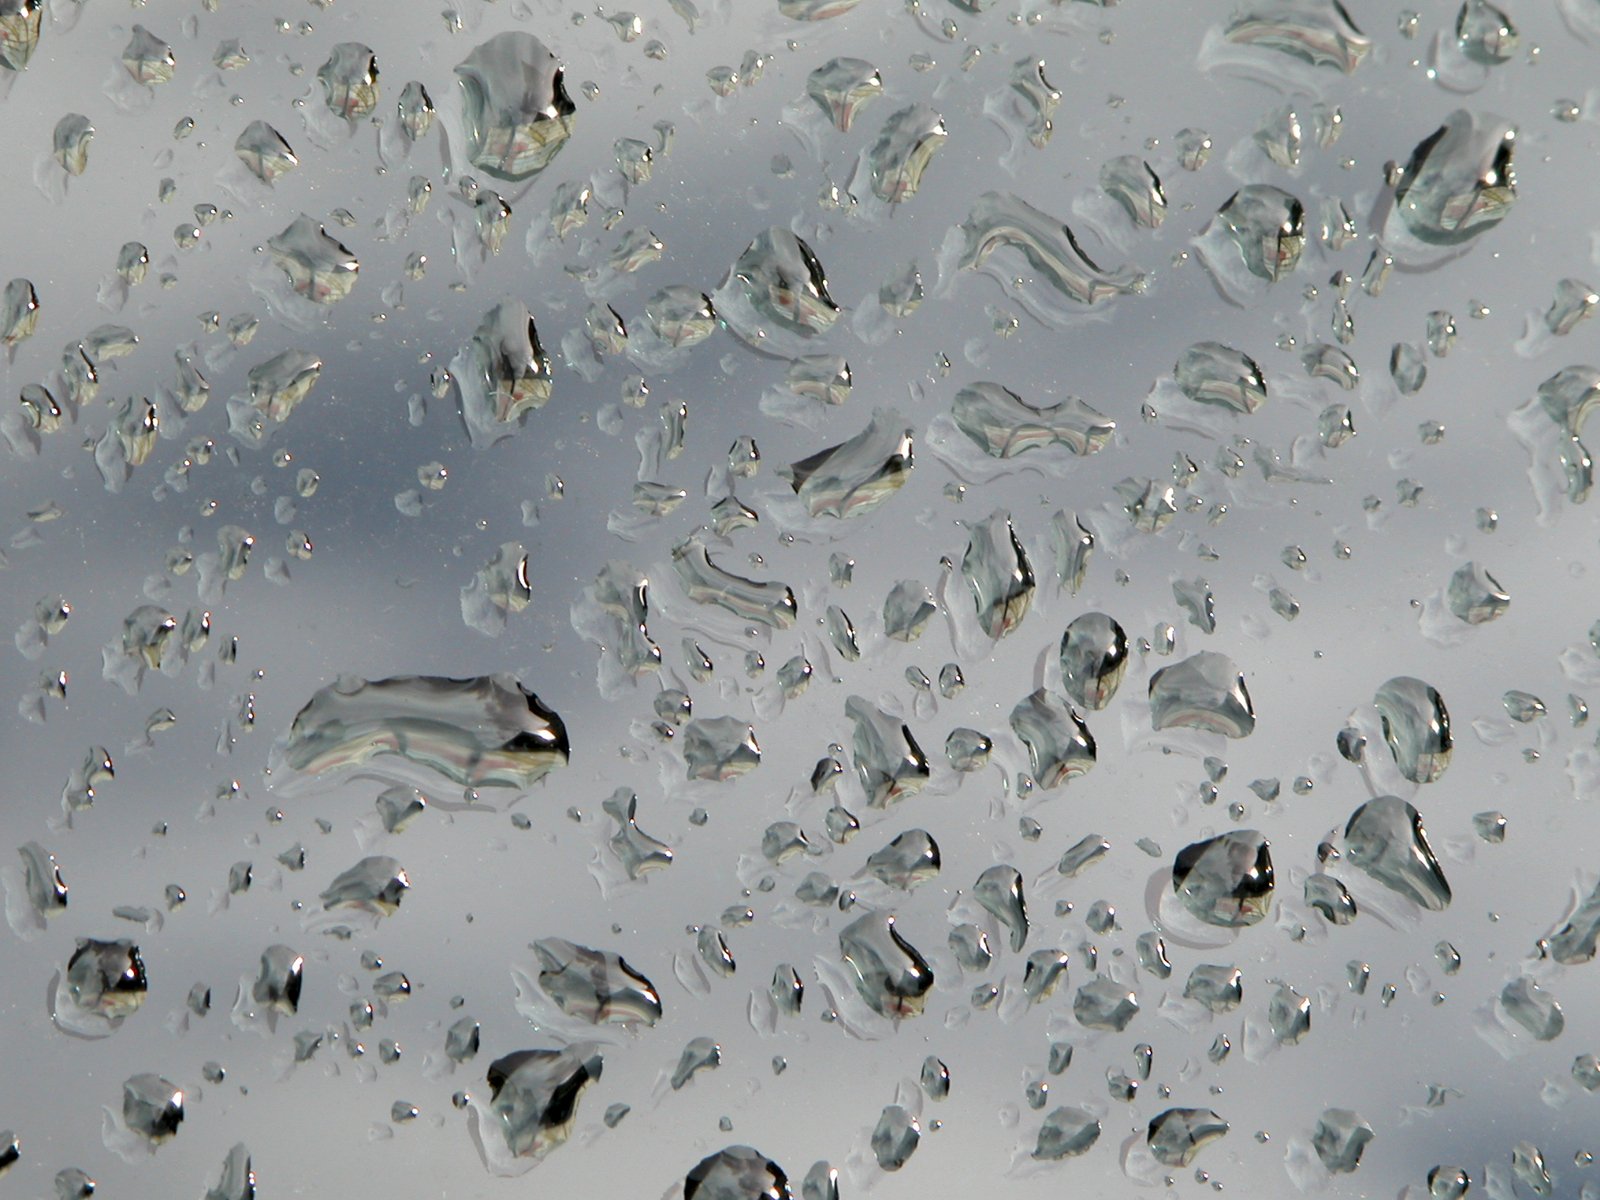 rain droplets on the window and a blue sky in the background